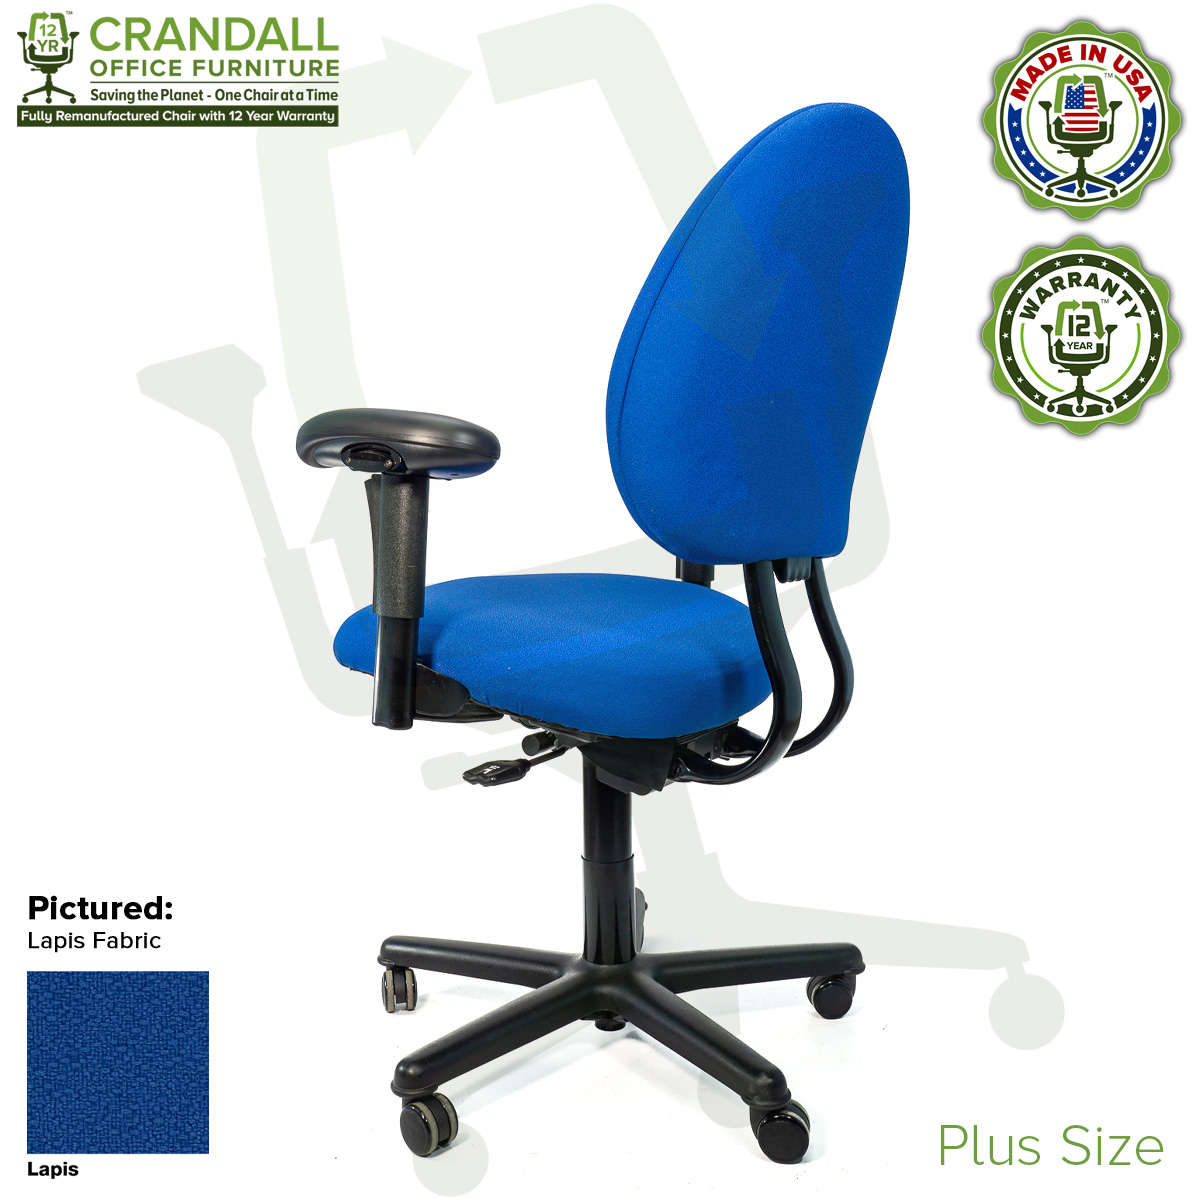 Crandall Office Furniture Remanufactured Steelcase Criterion Plus Chair with 12 Year Warranty - 04